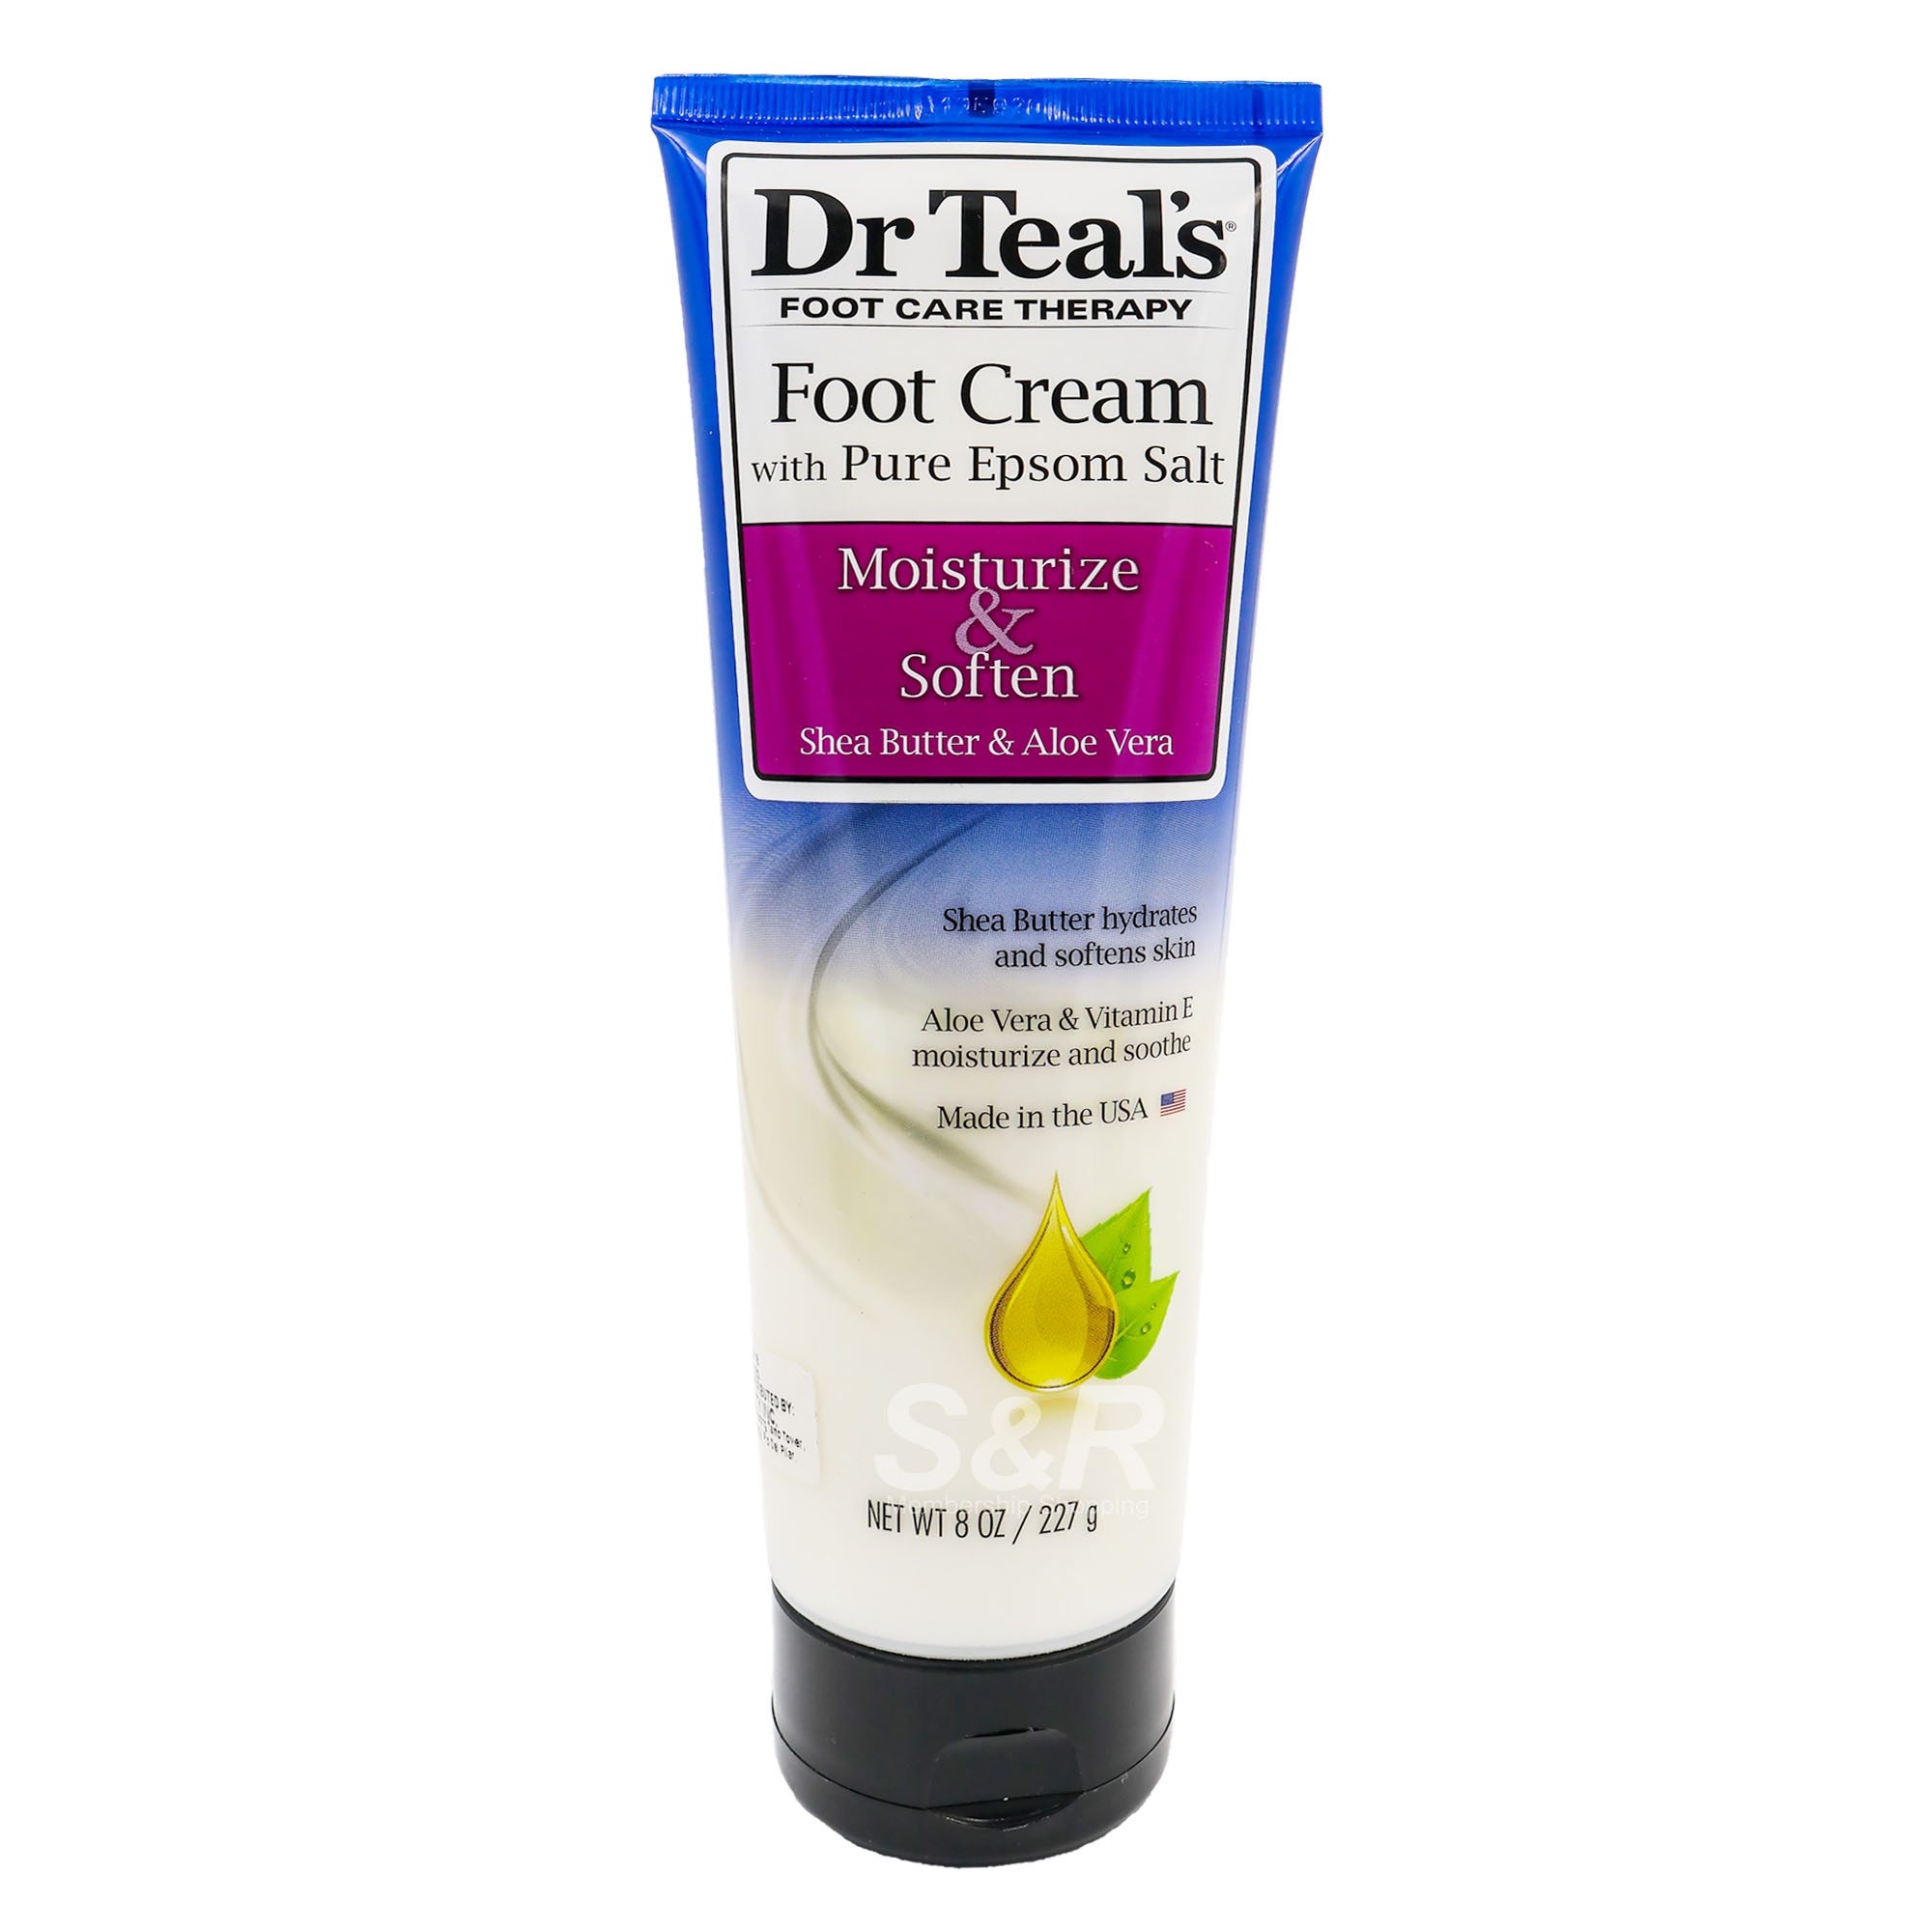 Dr. Teal’s Moisturize and Soften Foot Cream with Pure Epsom Salt 227g